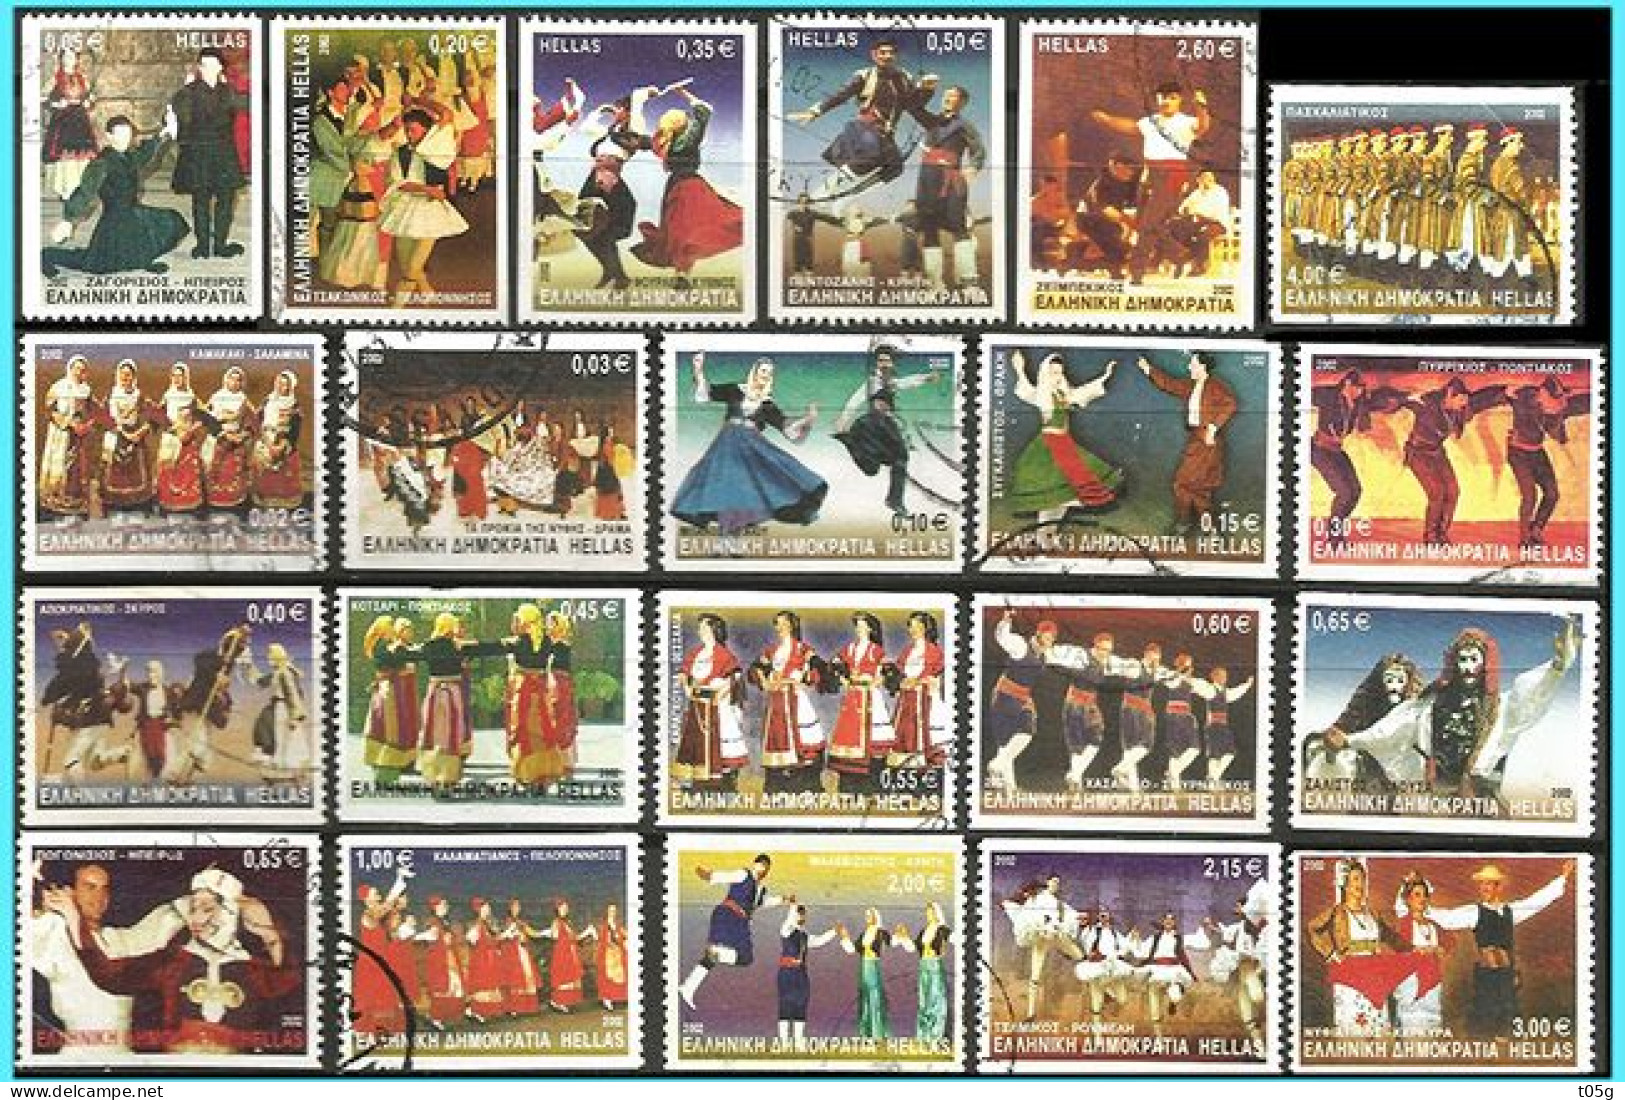 GREECE- GRECE - HELLAS 2002: Greek  dances Compl. Set Used  with Perforate Horizontally Imperforate - Used Stamps